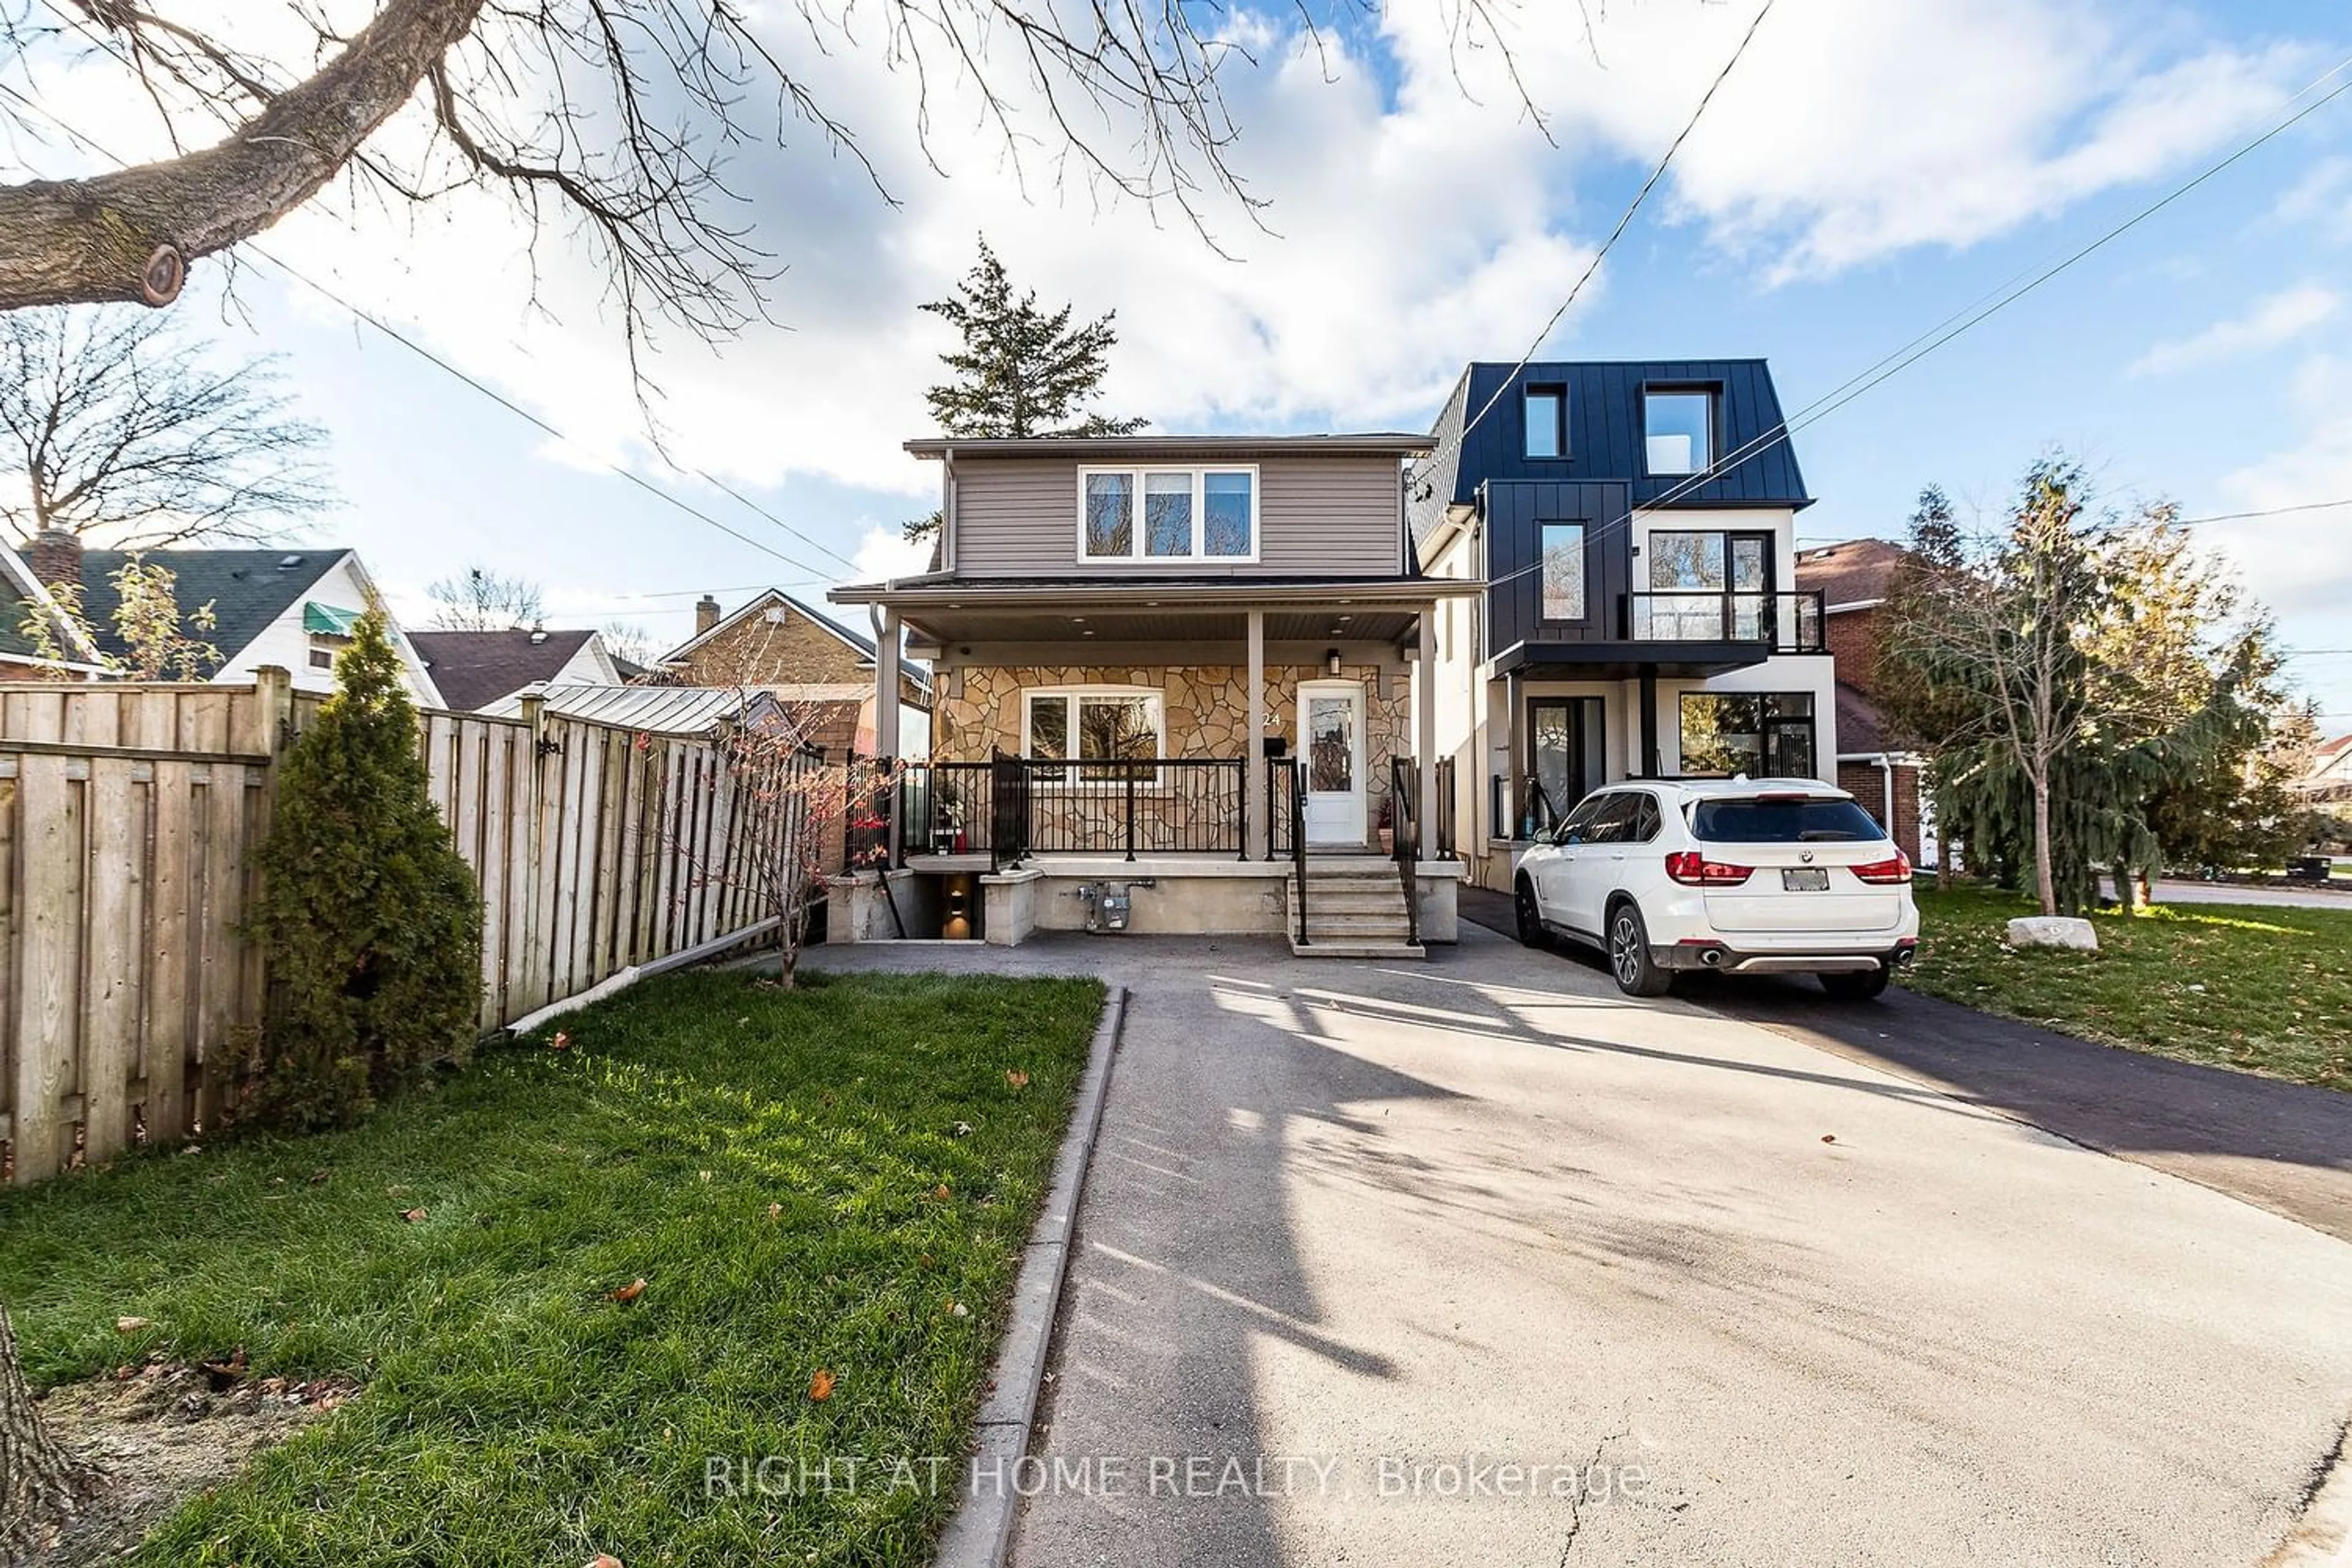 Frontside or backside of a home for 24 Syndicate Ave, Toronto Ontario M6N 4M5